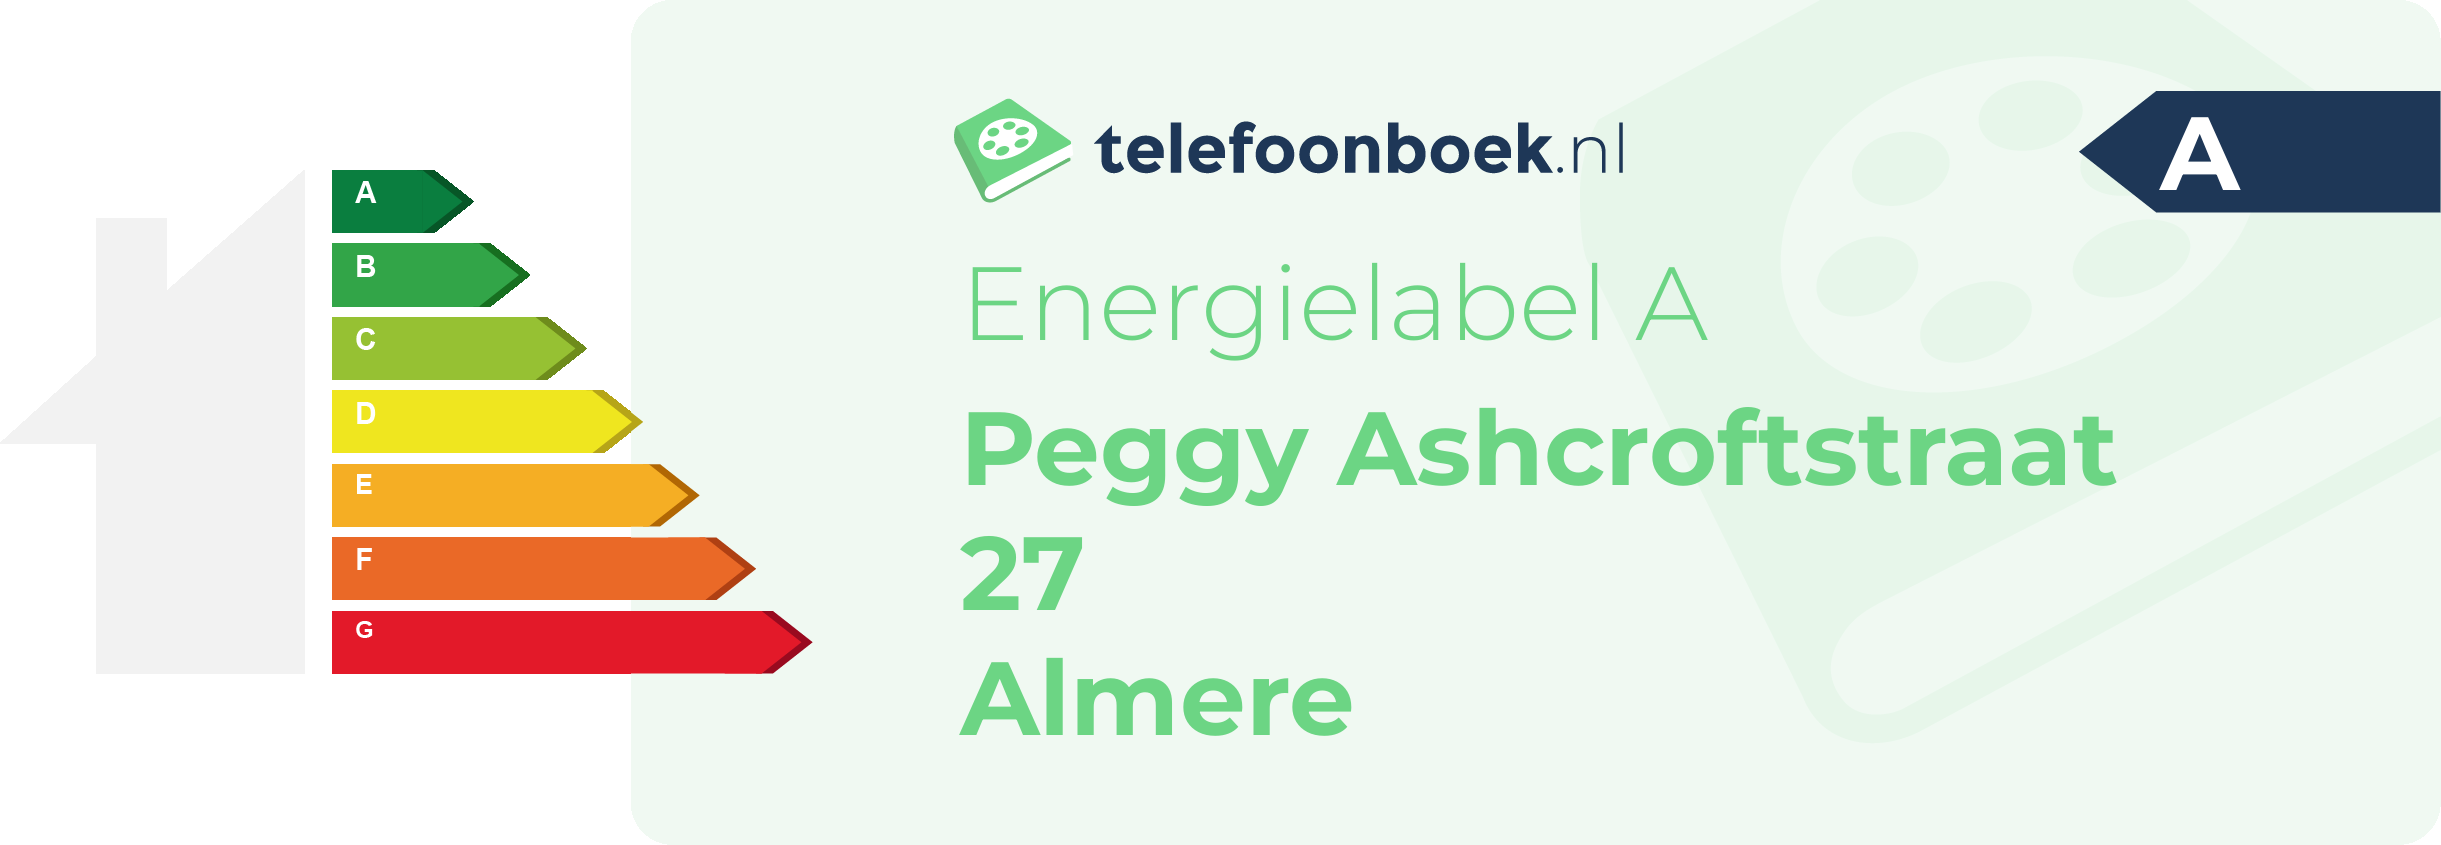 Energielabel Peggy Ashcroftstraat 27 Almere